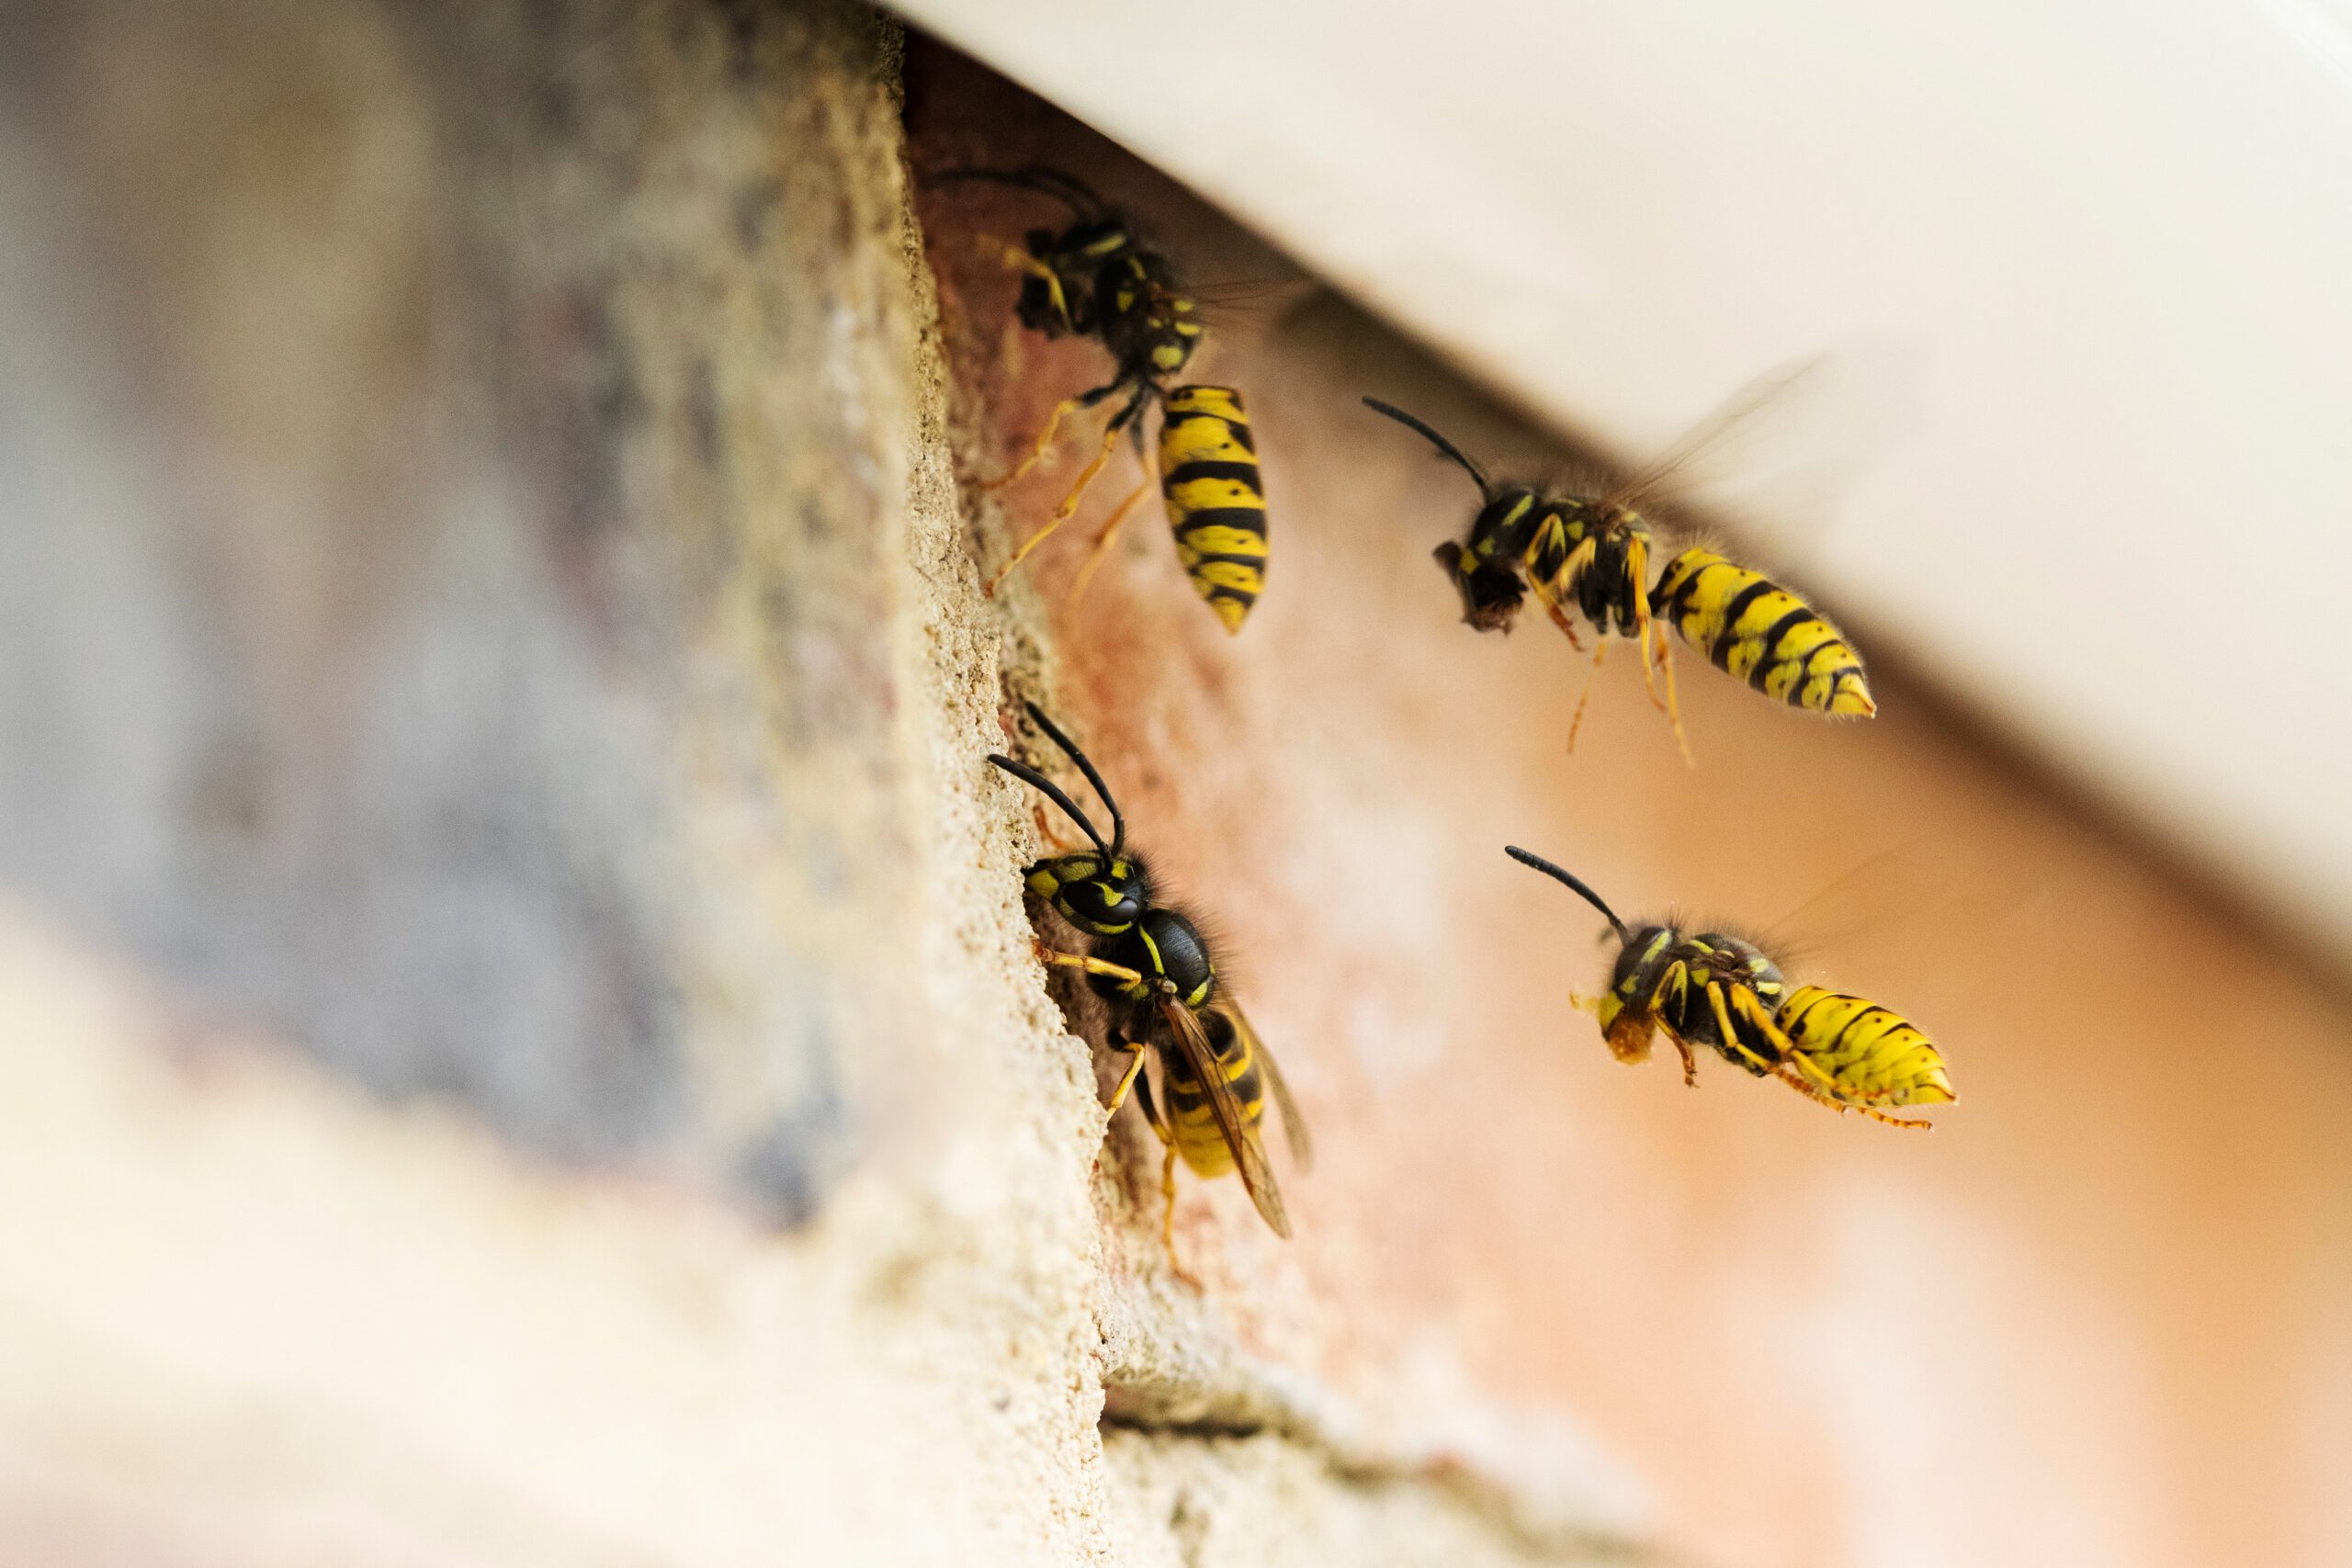 wasps entering a home through a gap under the gutters and roof